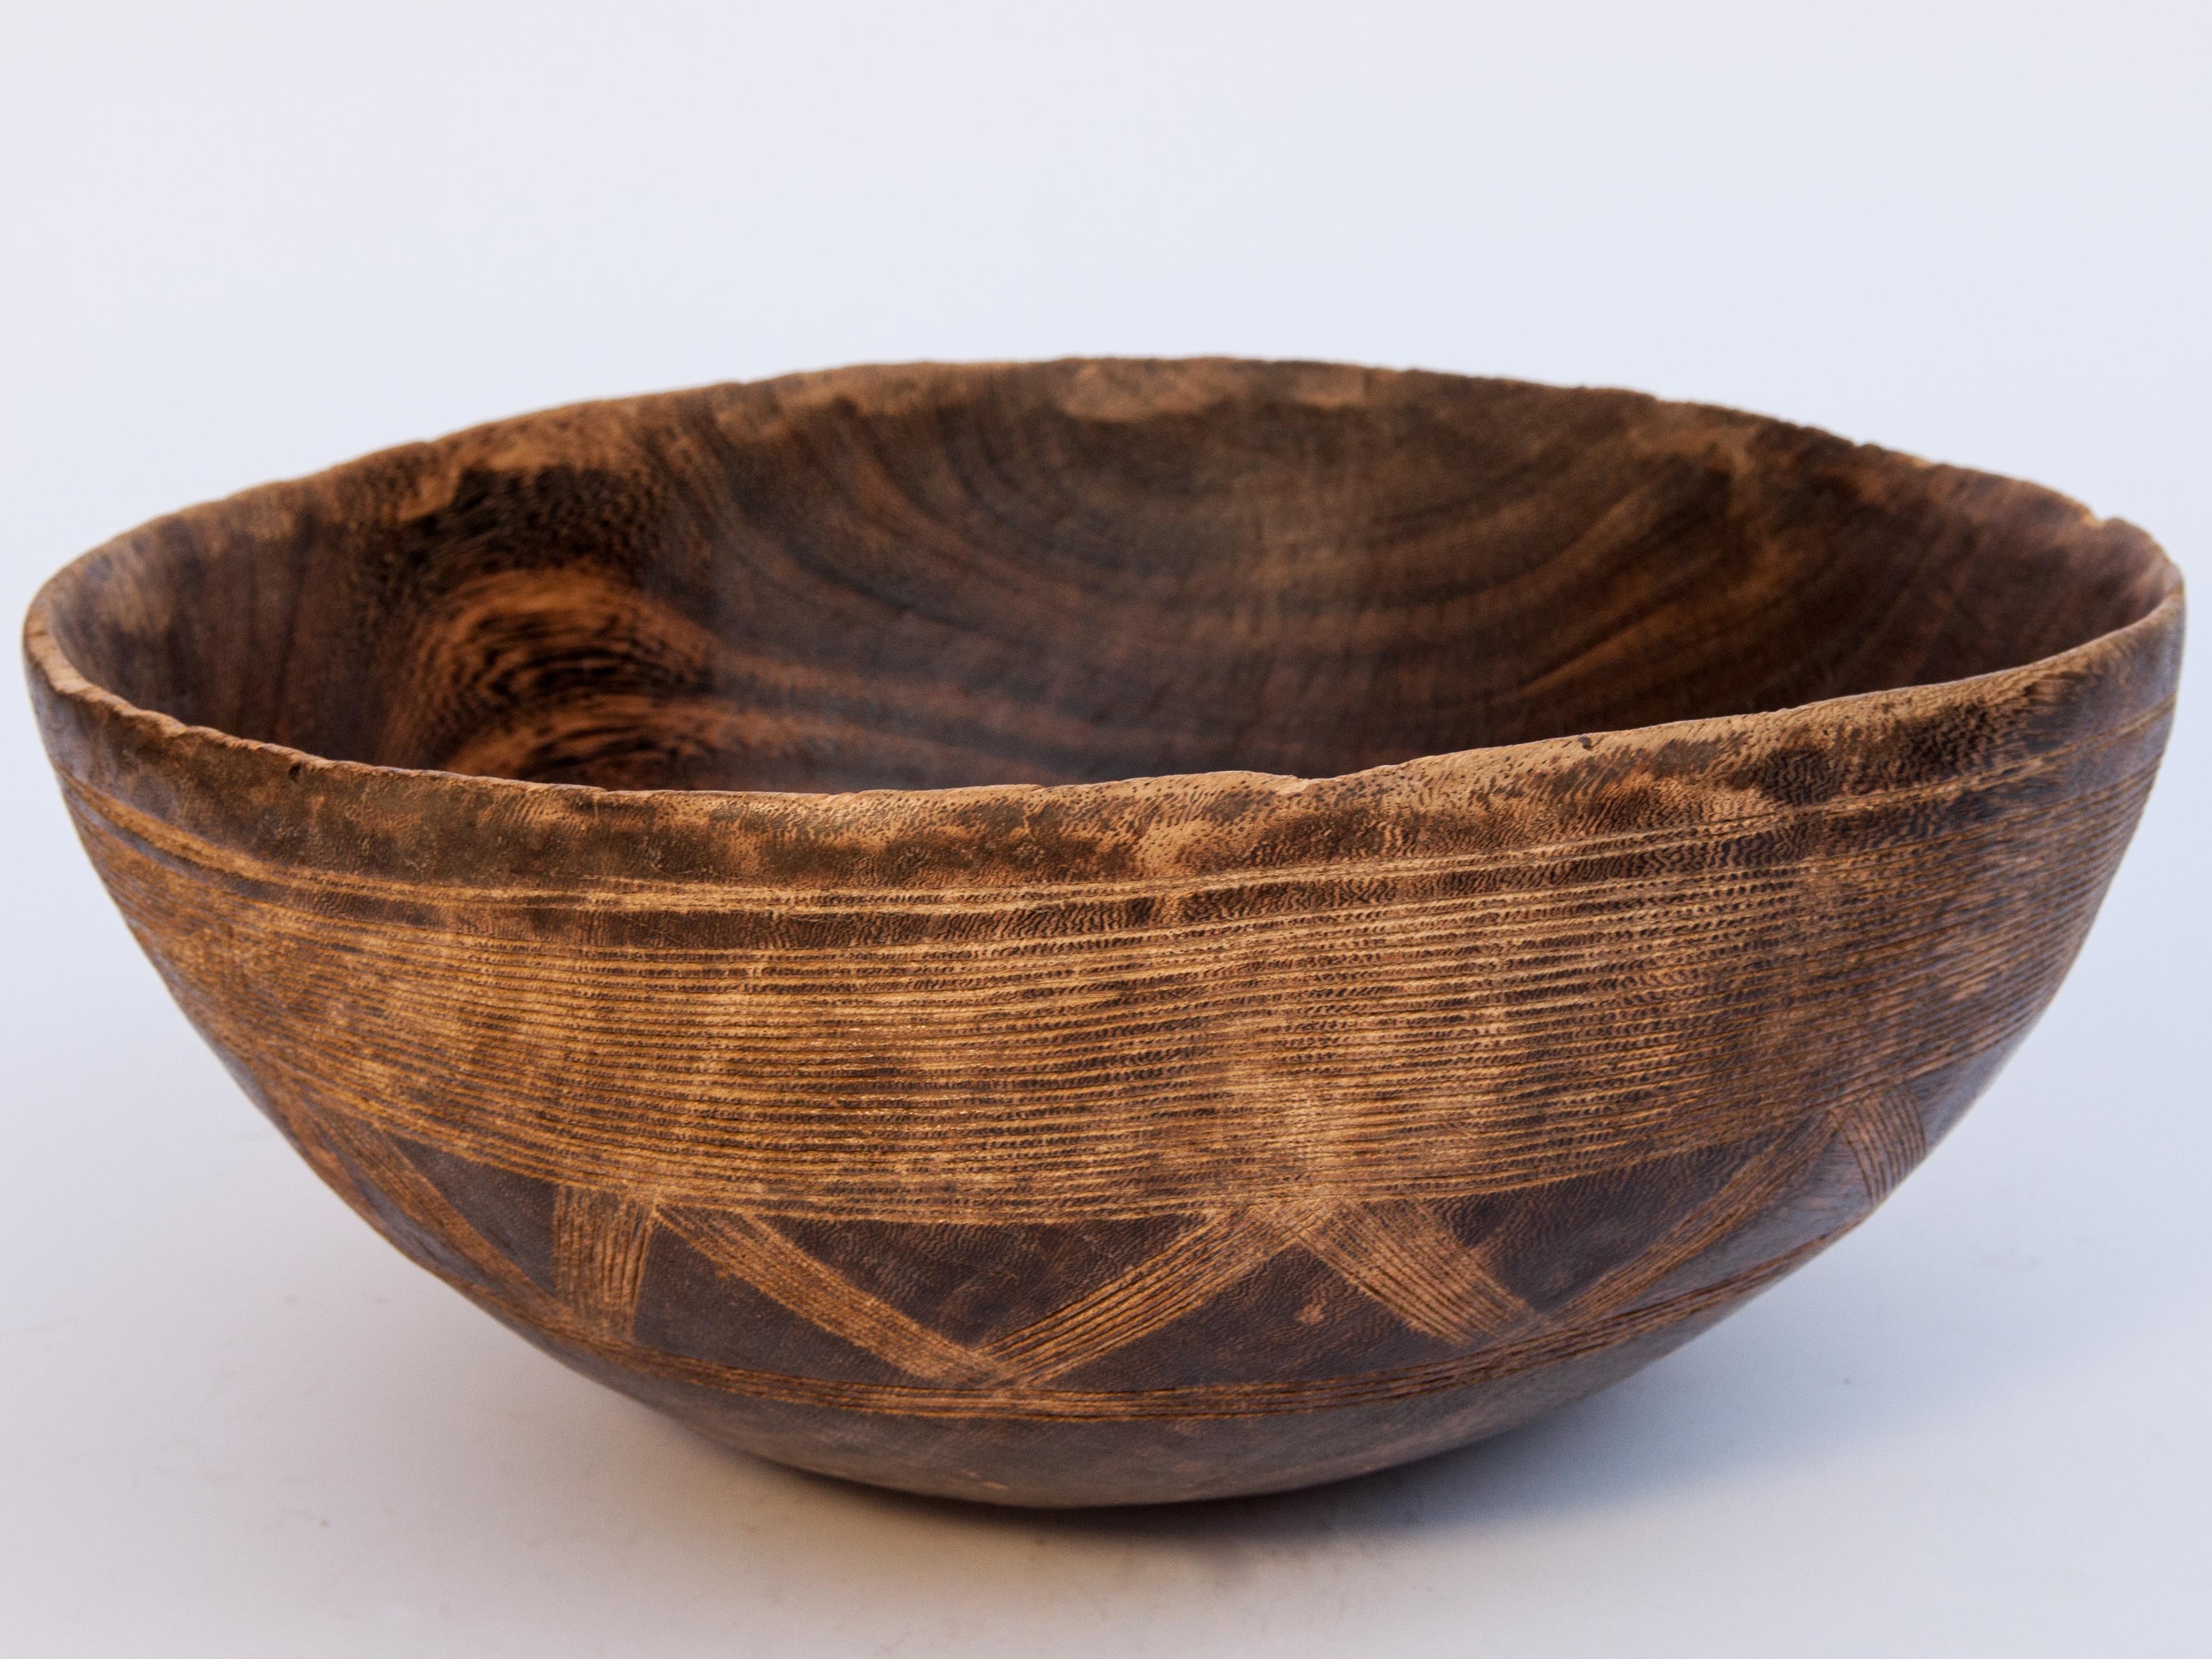 Sahrawi Tribal Wooden Bowl with Carved Design, Tuareg of West Africa, Mid-20th Century